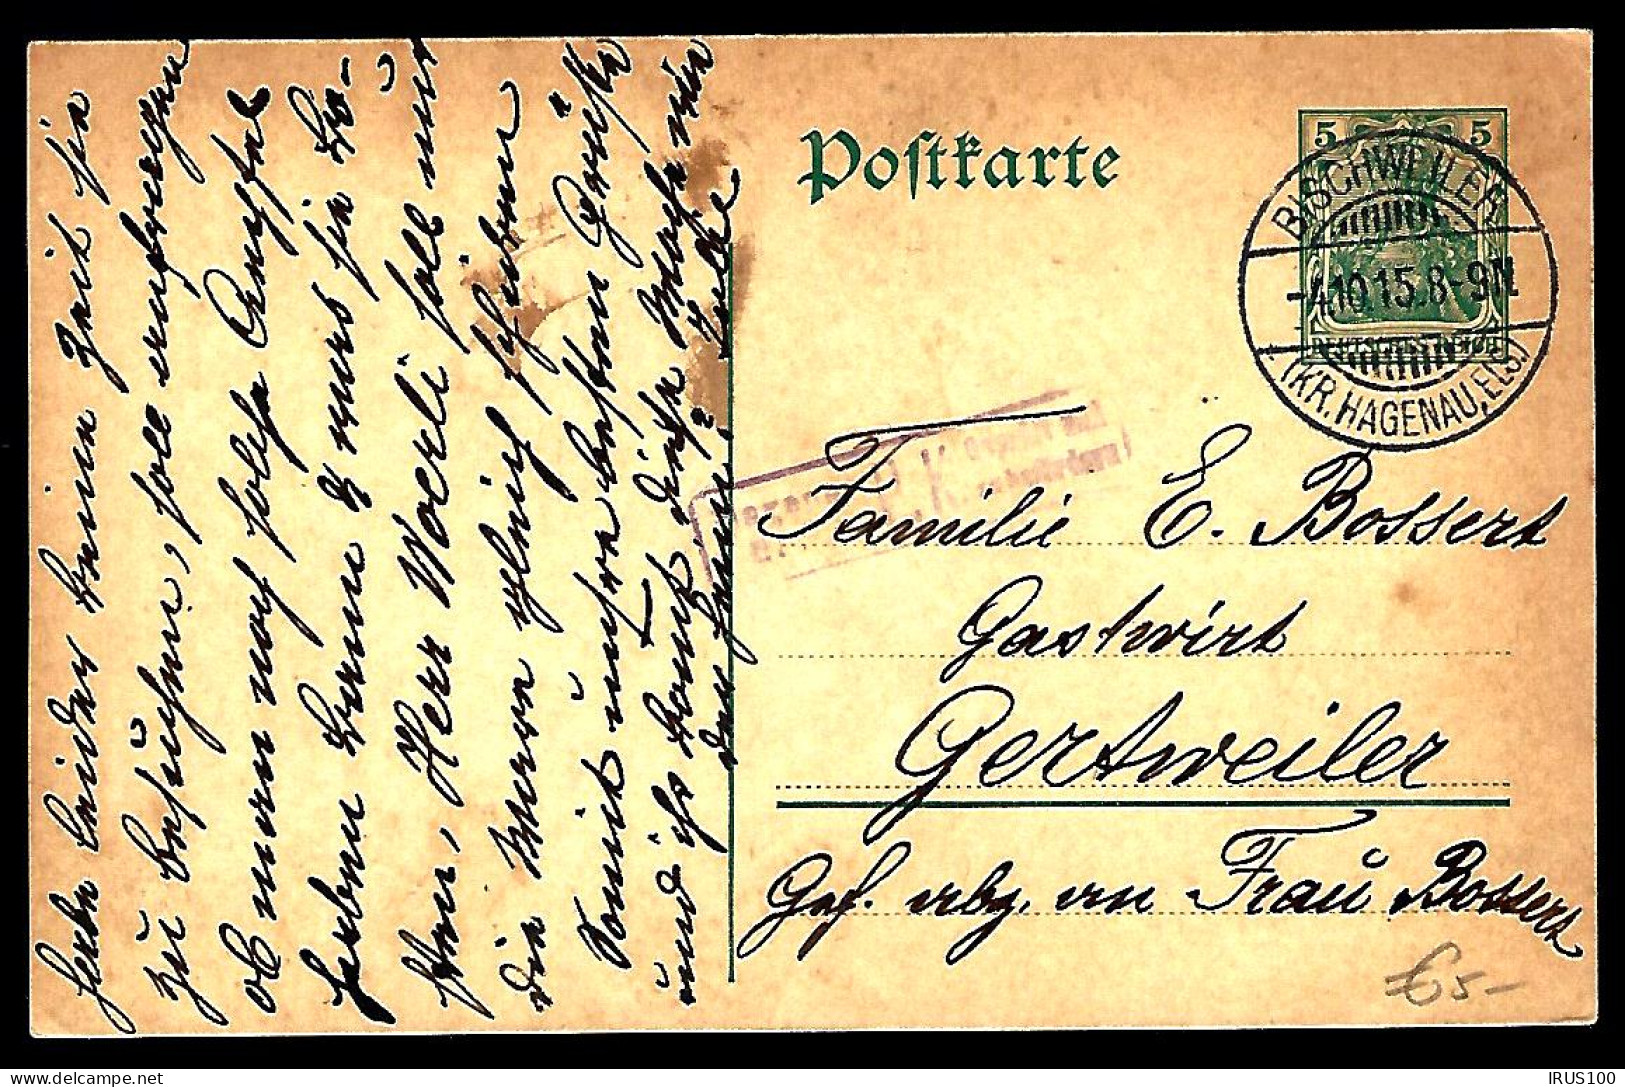 COURRIER DE BISCHWILLER - 1908 - POUR GERTWEILER - AFF: 5Pf GERMANIA - - Covers & Documents